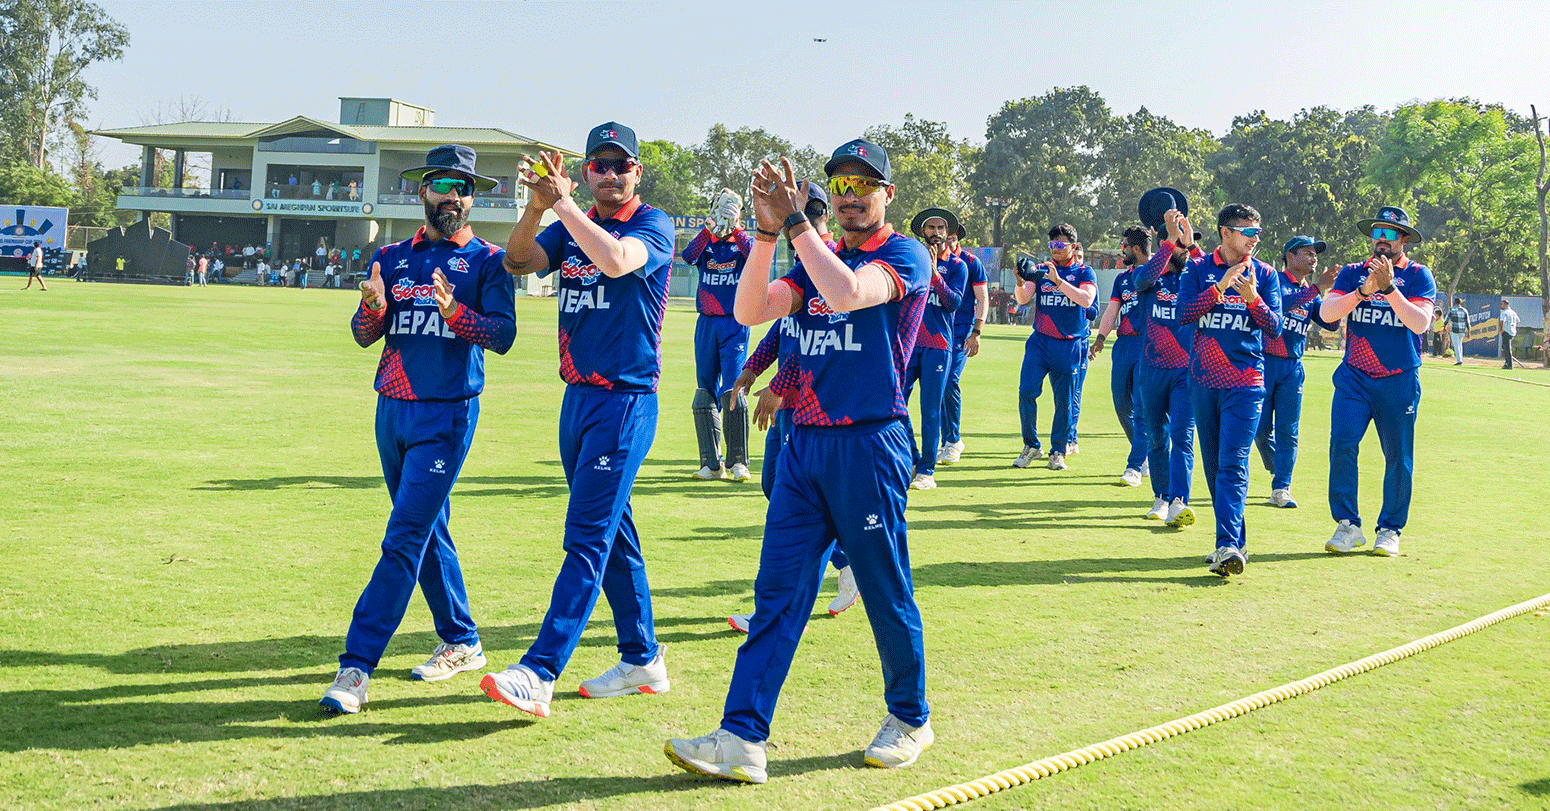 Nepal opts to bowl first losing toss against West Indies ‘A’